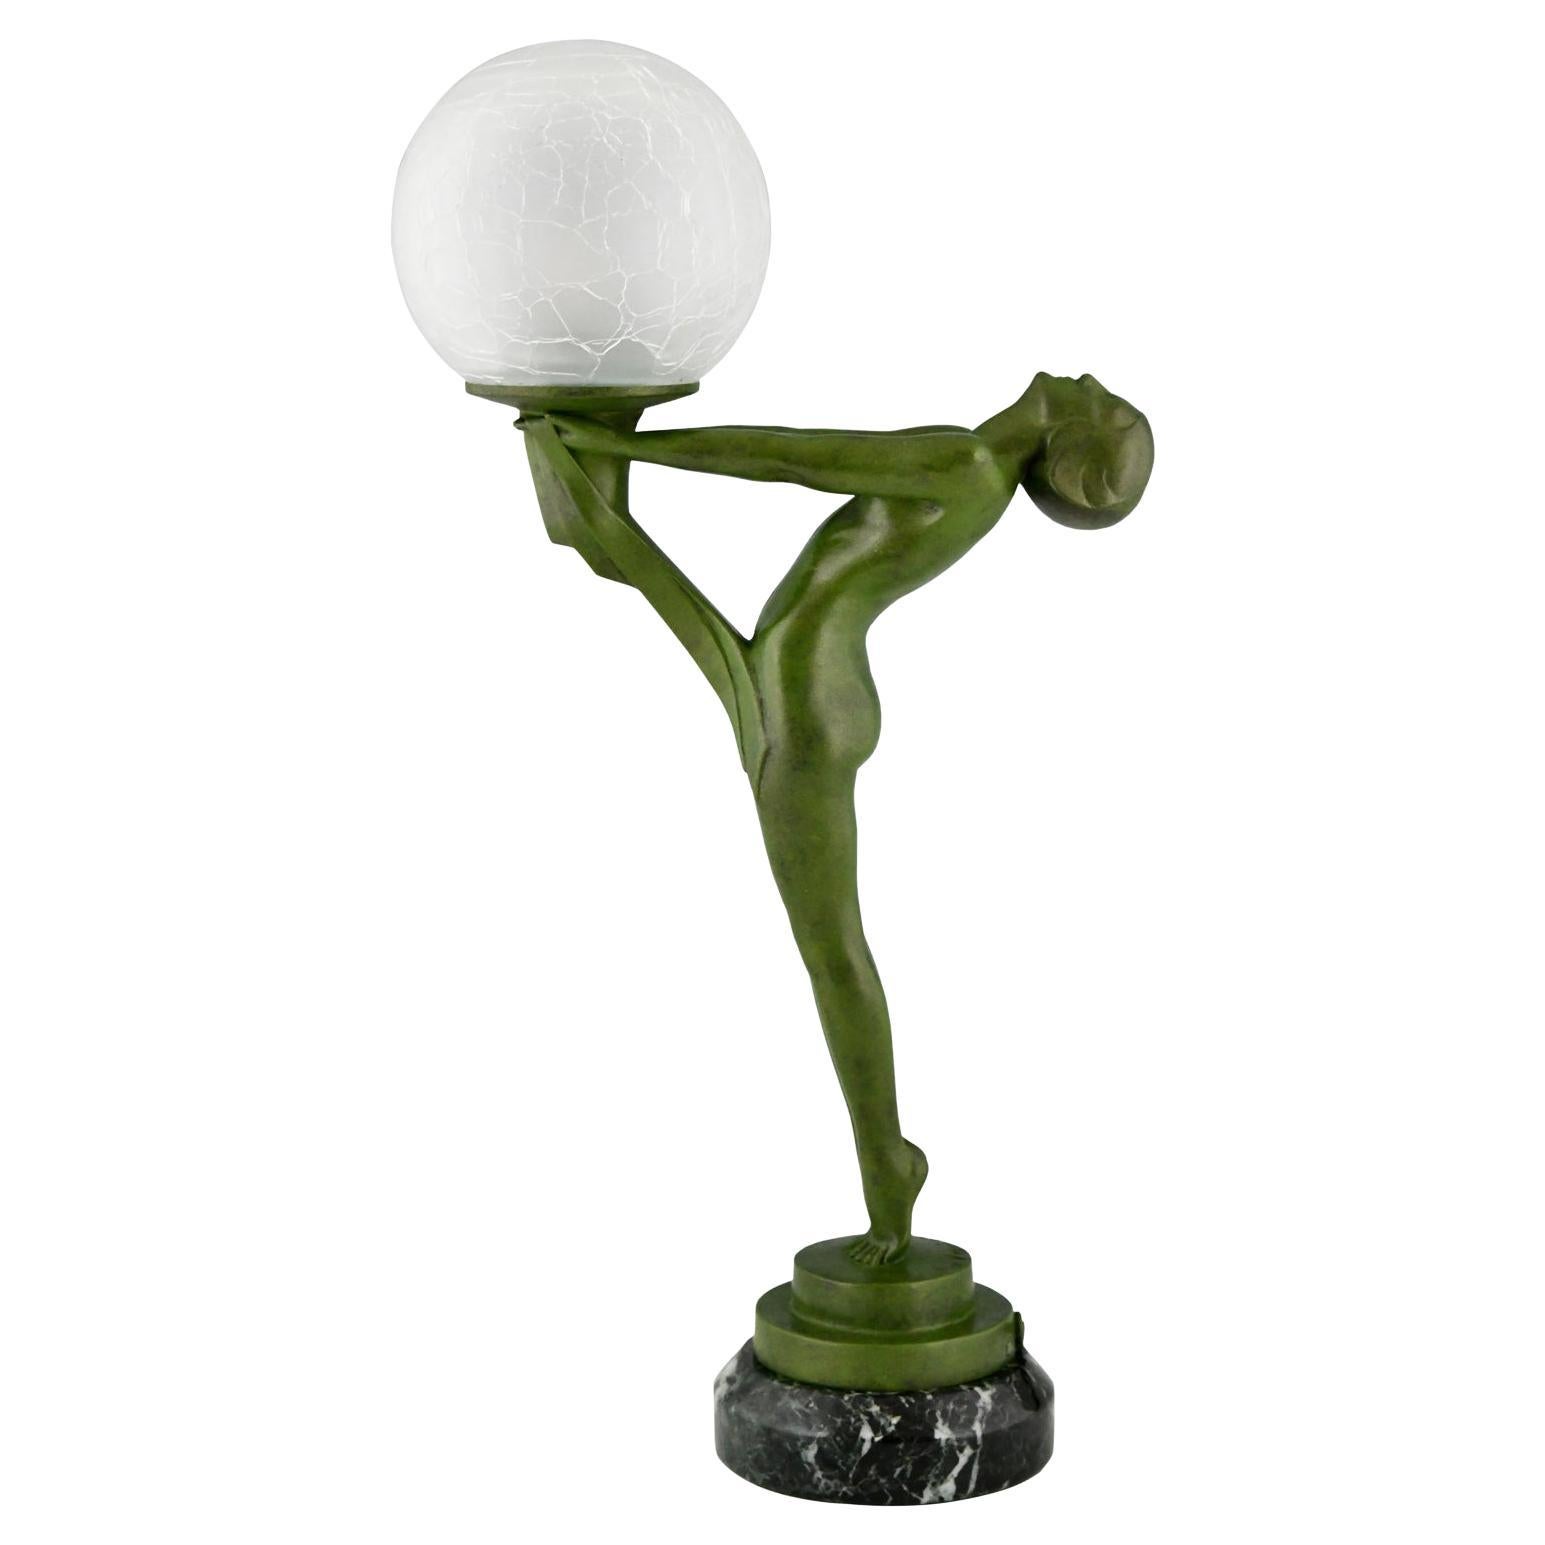 Art Deco Lamp Standing Nude with Ball Clarté by Max Le Verrier Original 1930